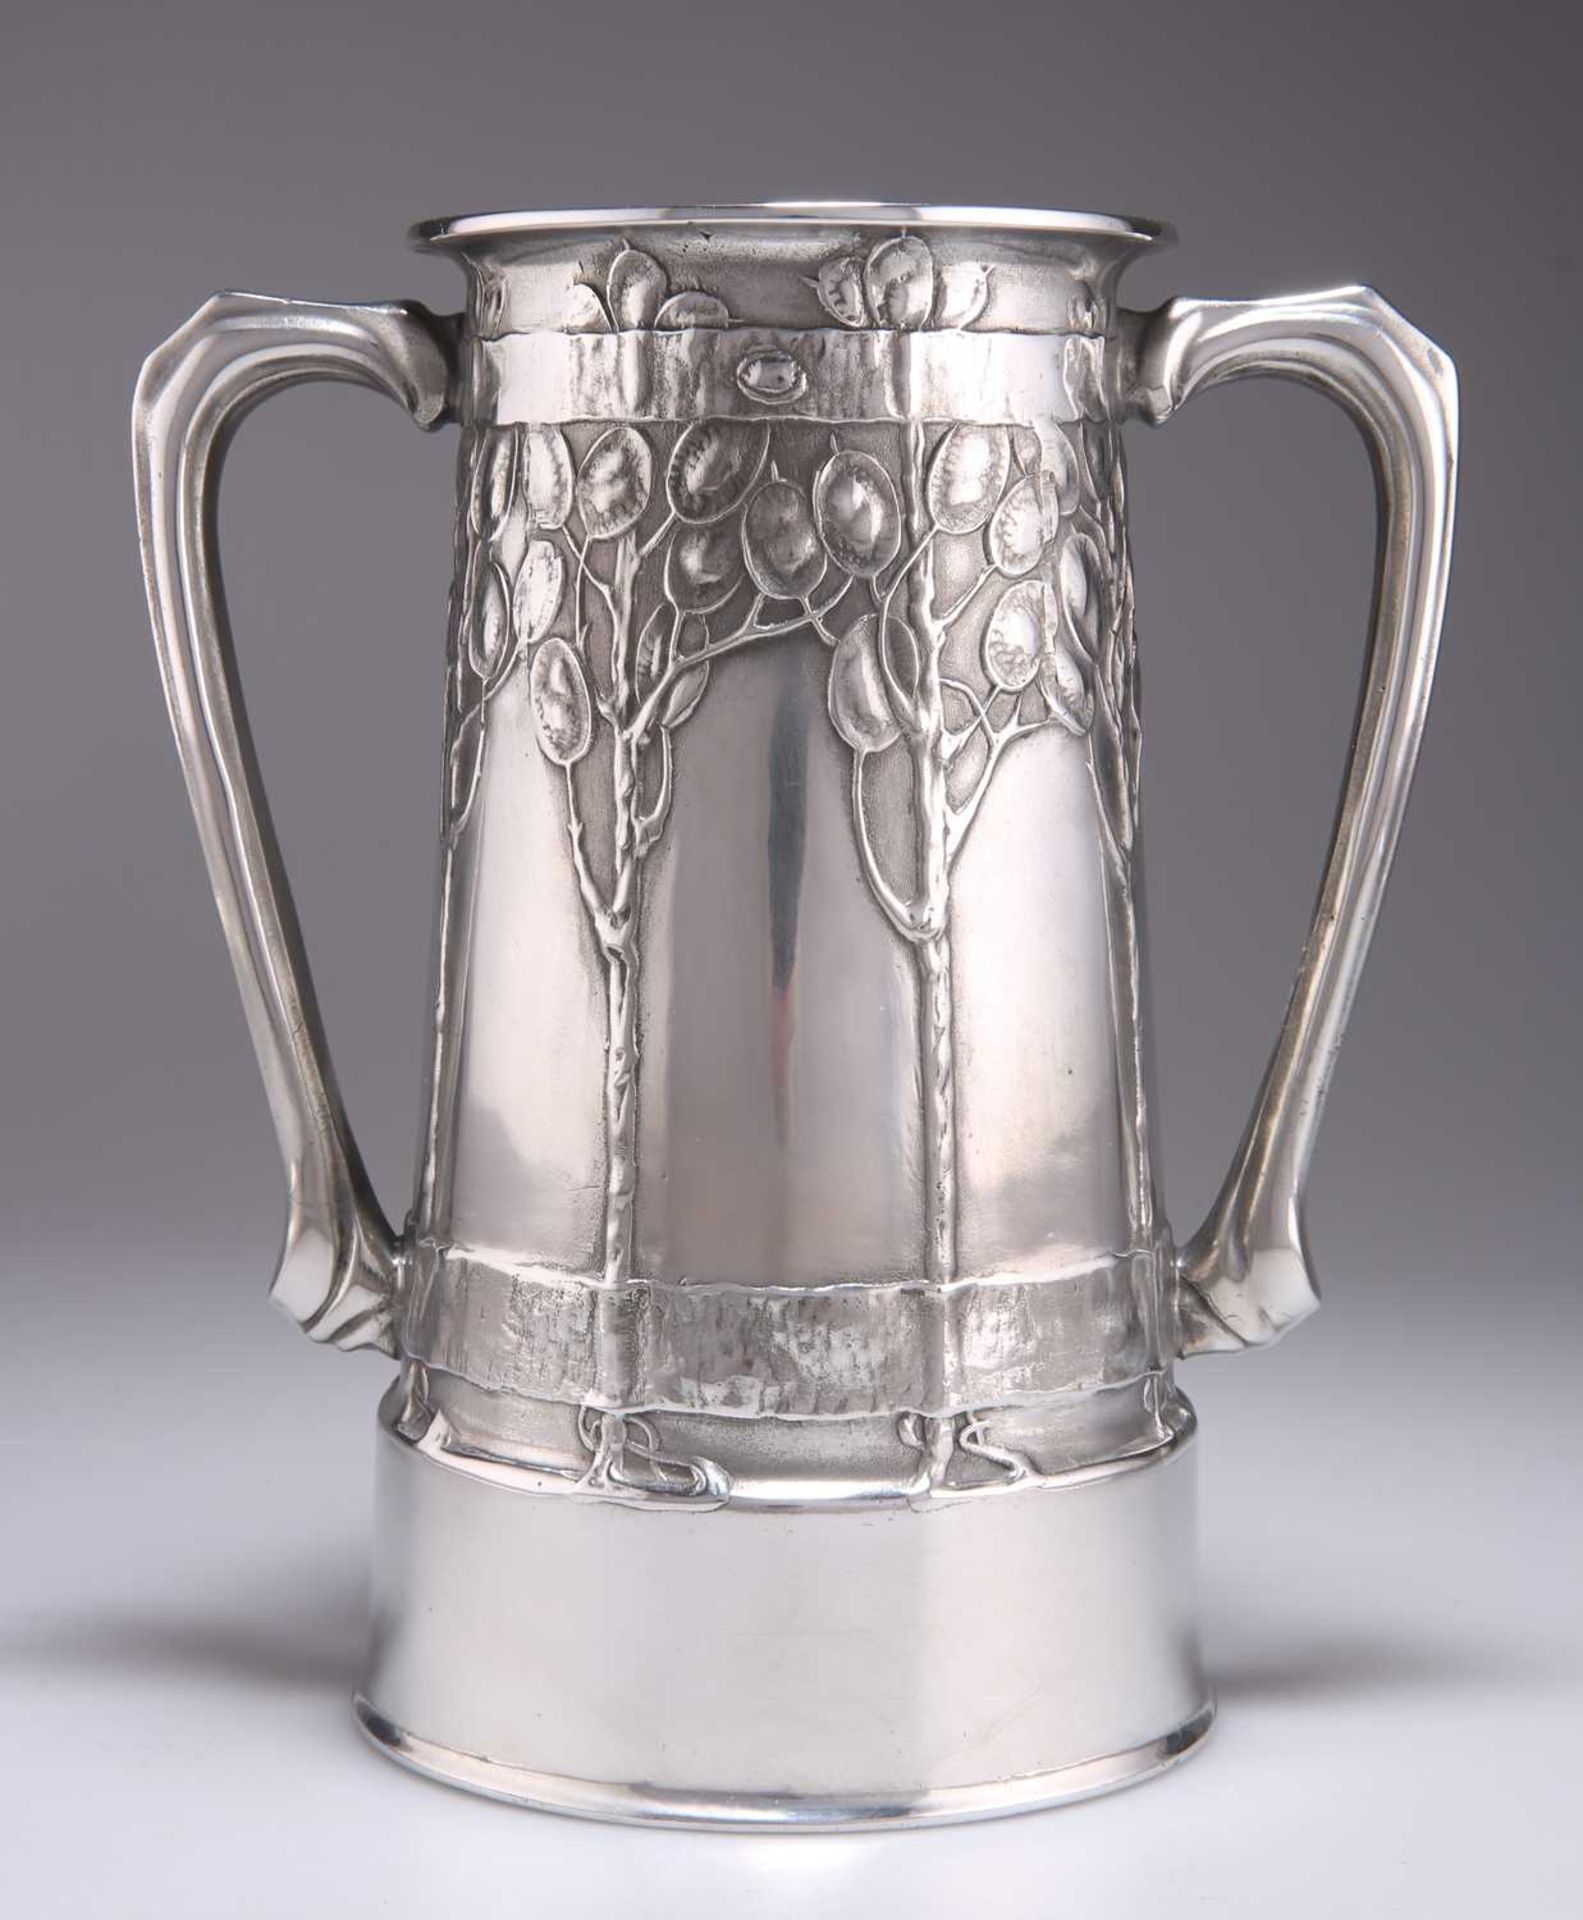 DAVID VEASEY FOR LIBERTY & CO, A TUDRIC PEWTER LOVING CUP - Image 2 of 3